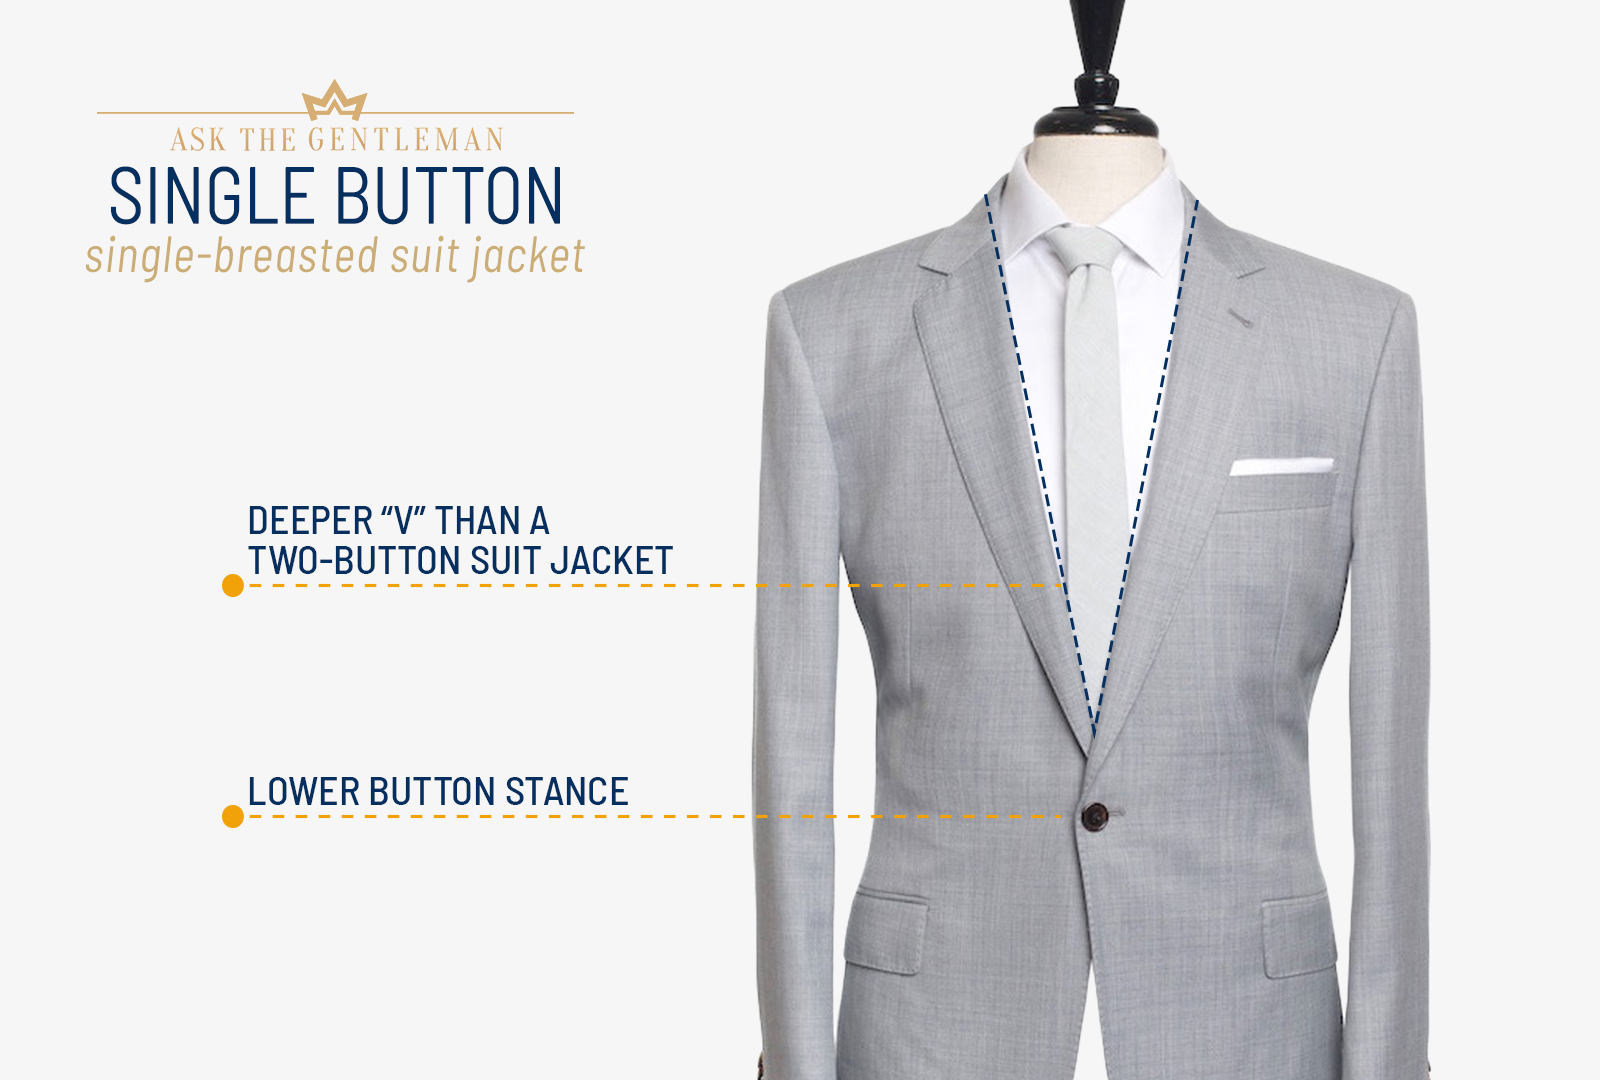 Single-breasted one-button suit jacket style rules